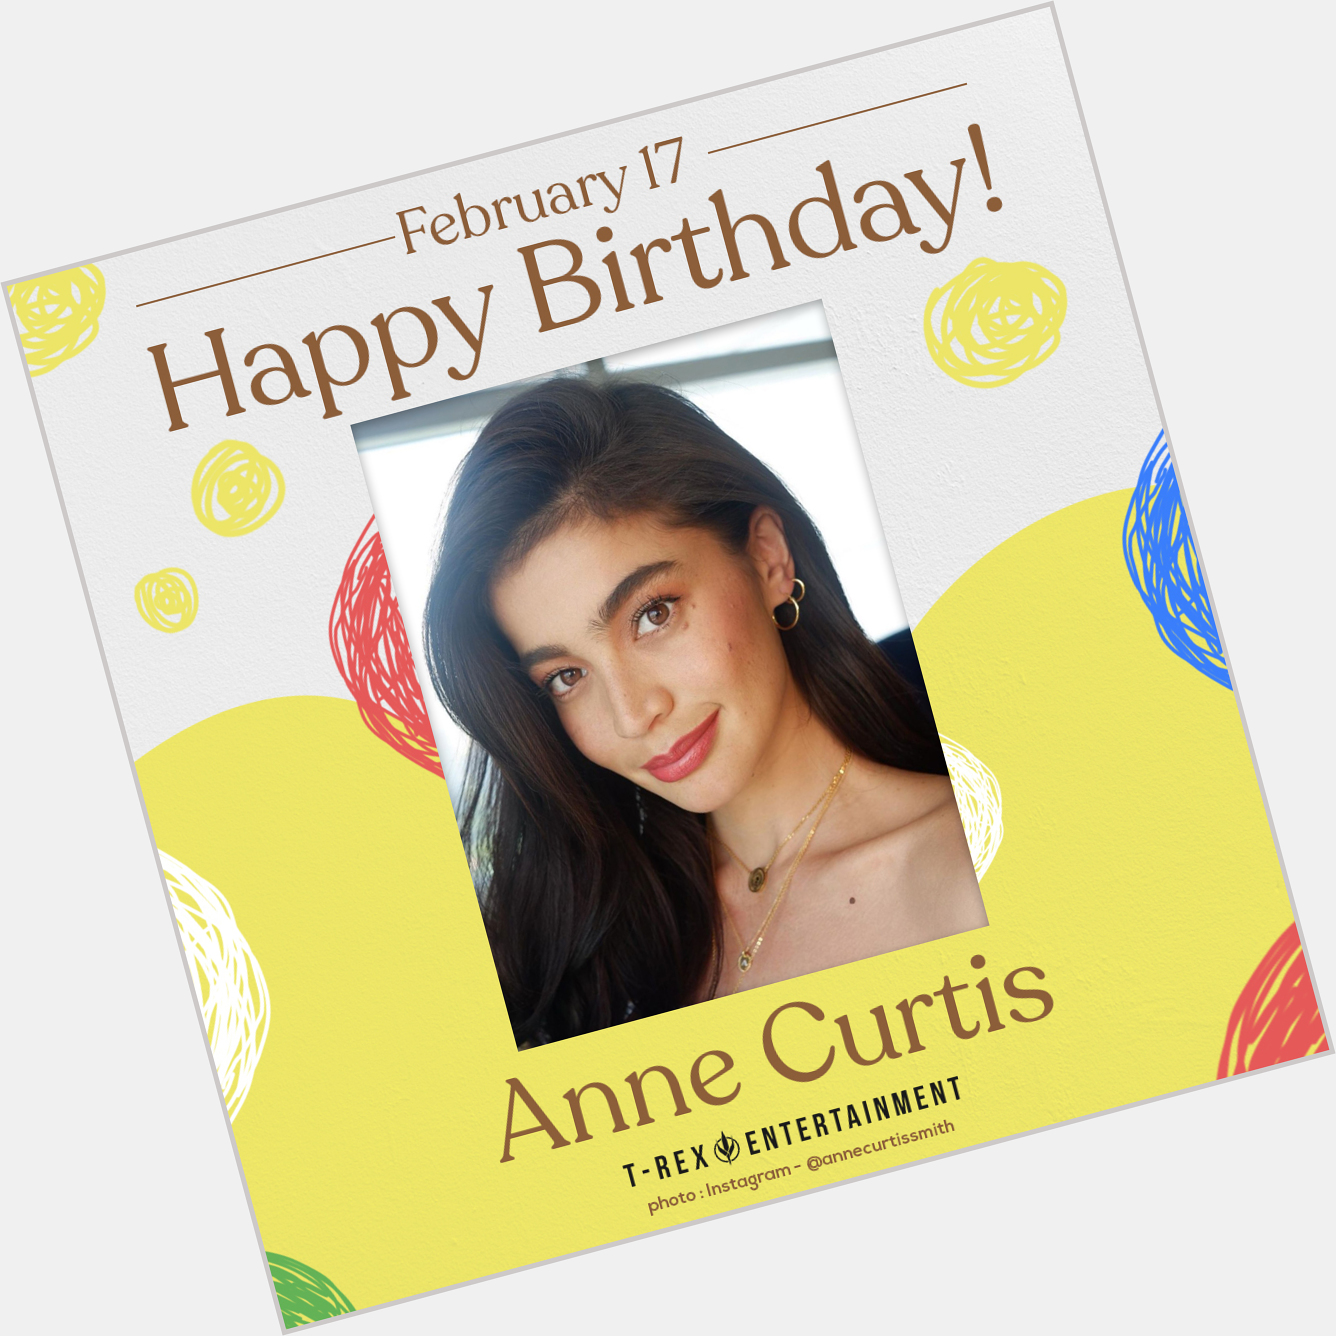 Happy birthday, Anne Curtis!

May you be blessed with more love from the people who care for you. 